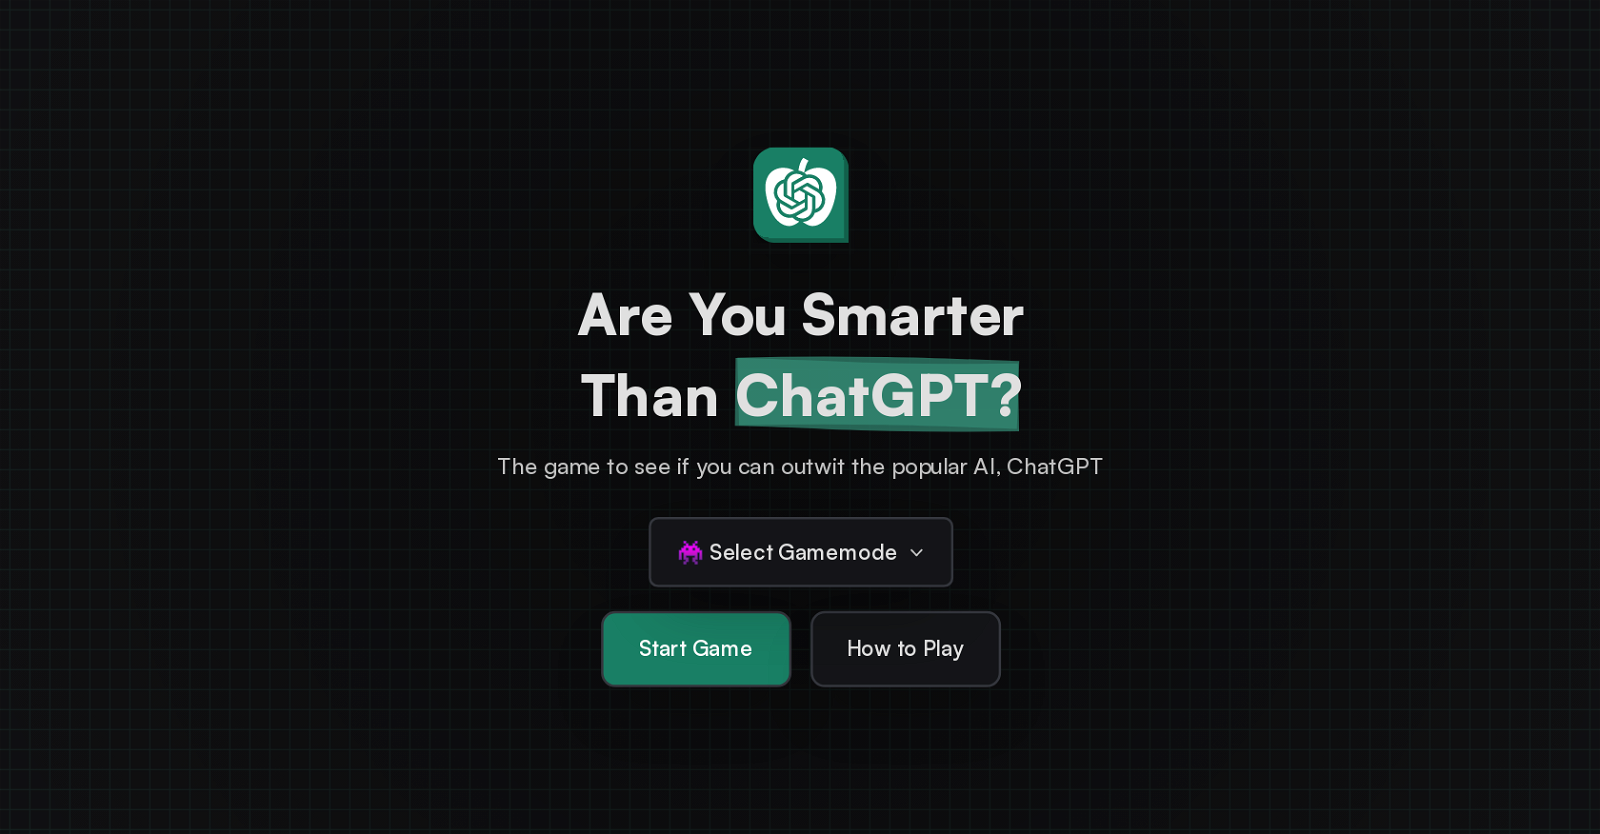 Are You Smarter Than ChatGPT?